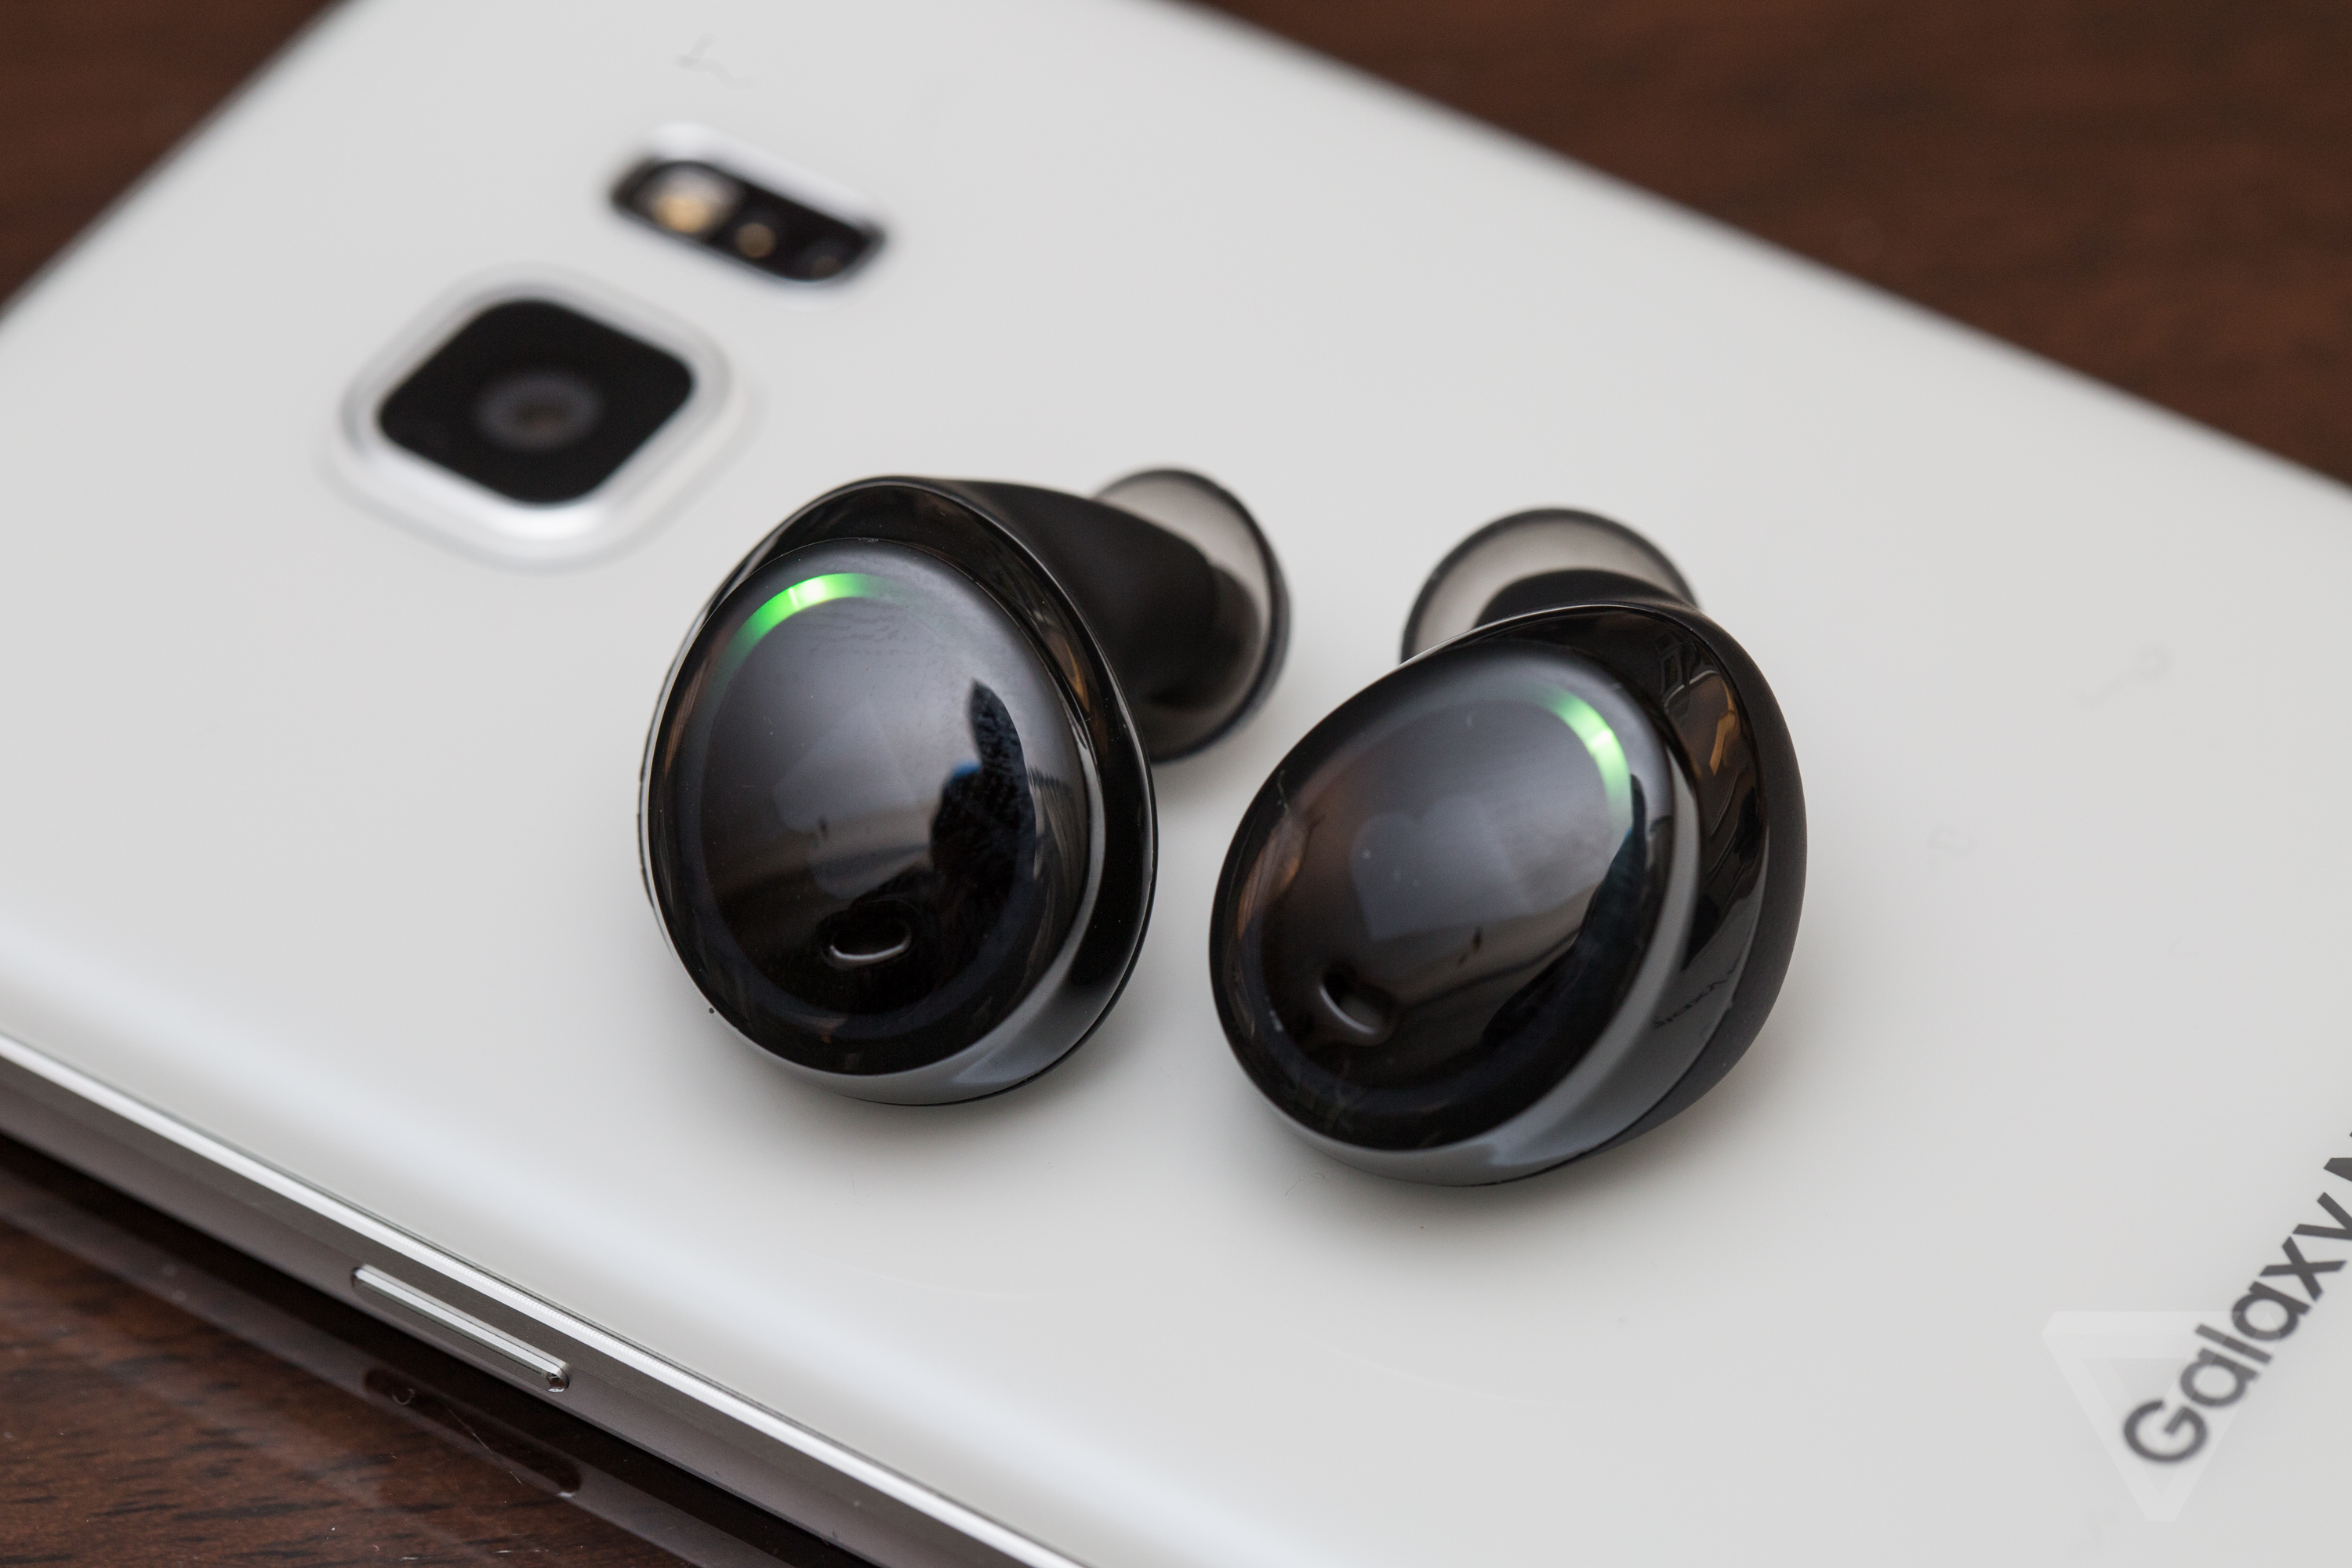 Samsung's upcoming 2017 flagship, the Samsung Galaxy S8 is reportedly set to be launched alongside Smasung's first Wireless Earbuds.